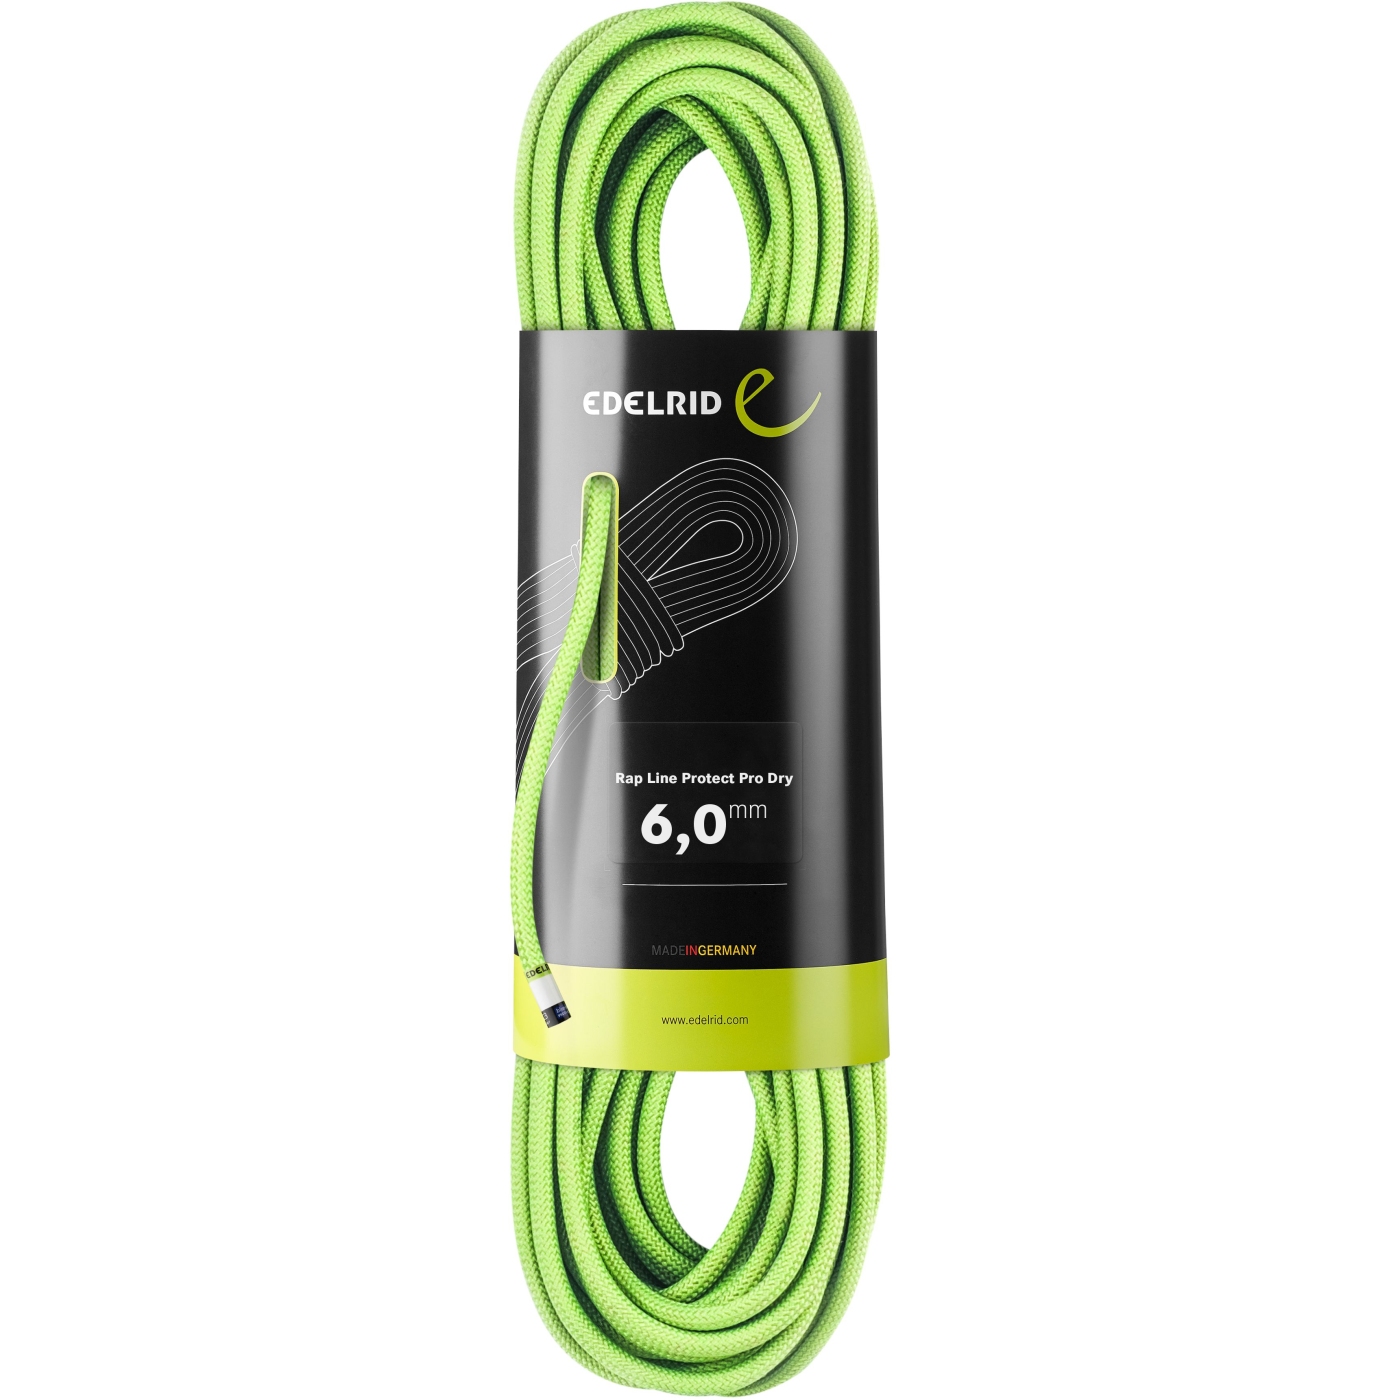 Picture of Edelrid Rap Line Protect Pro Dry 6mm Reep Cord - 30m - oasis